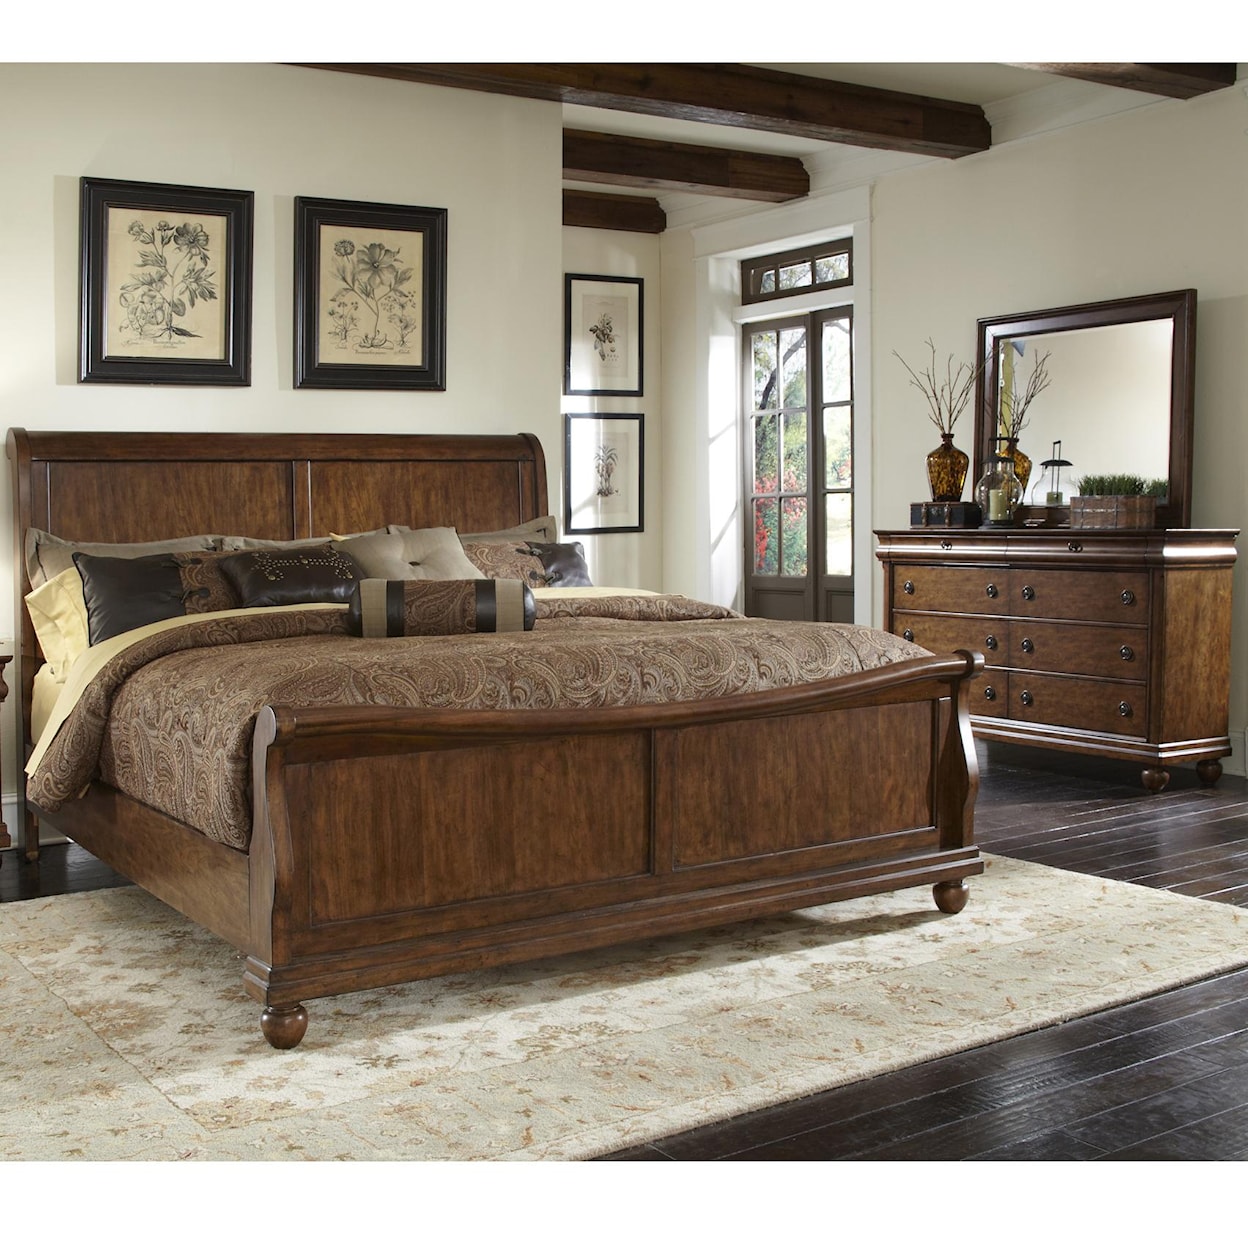 Liberty Furniture Rustic Traditions Queen Bedroom Group 1